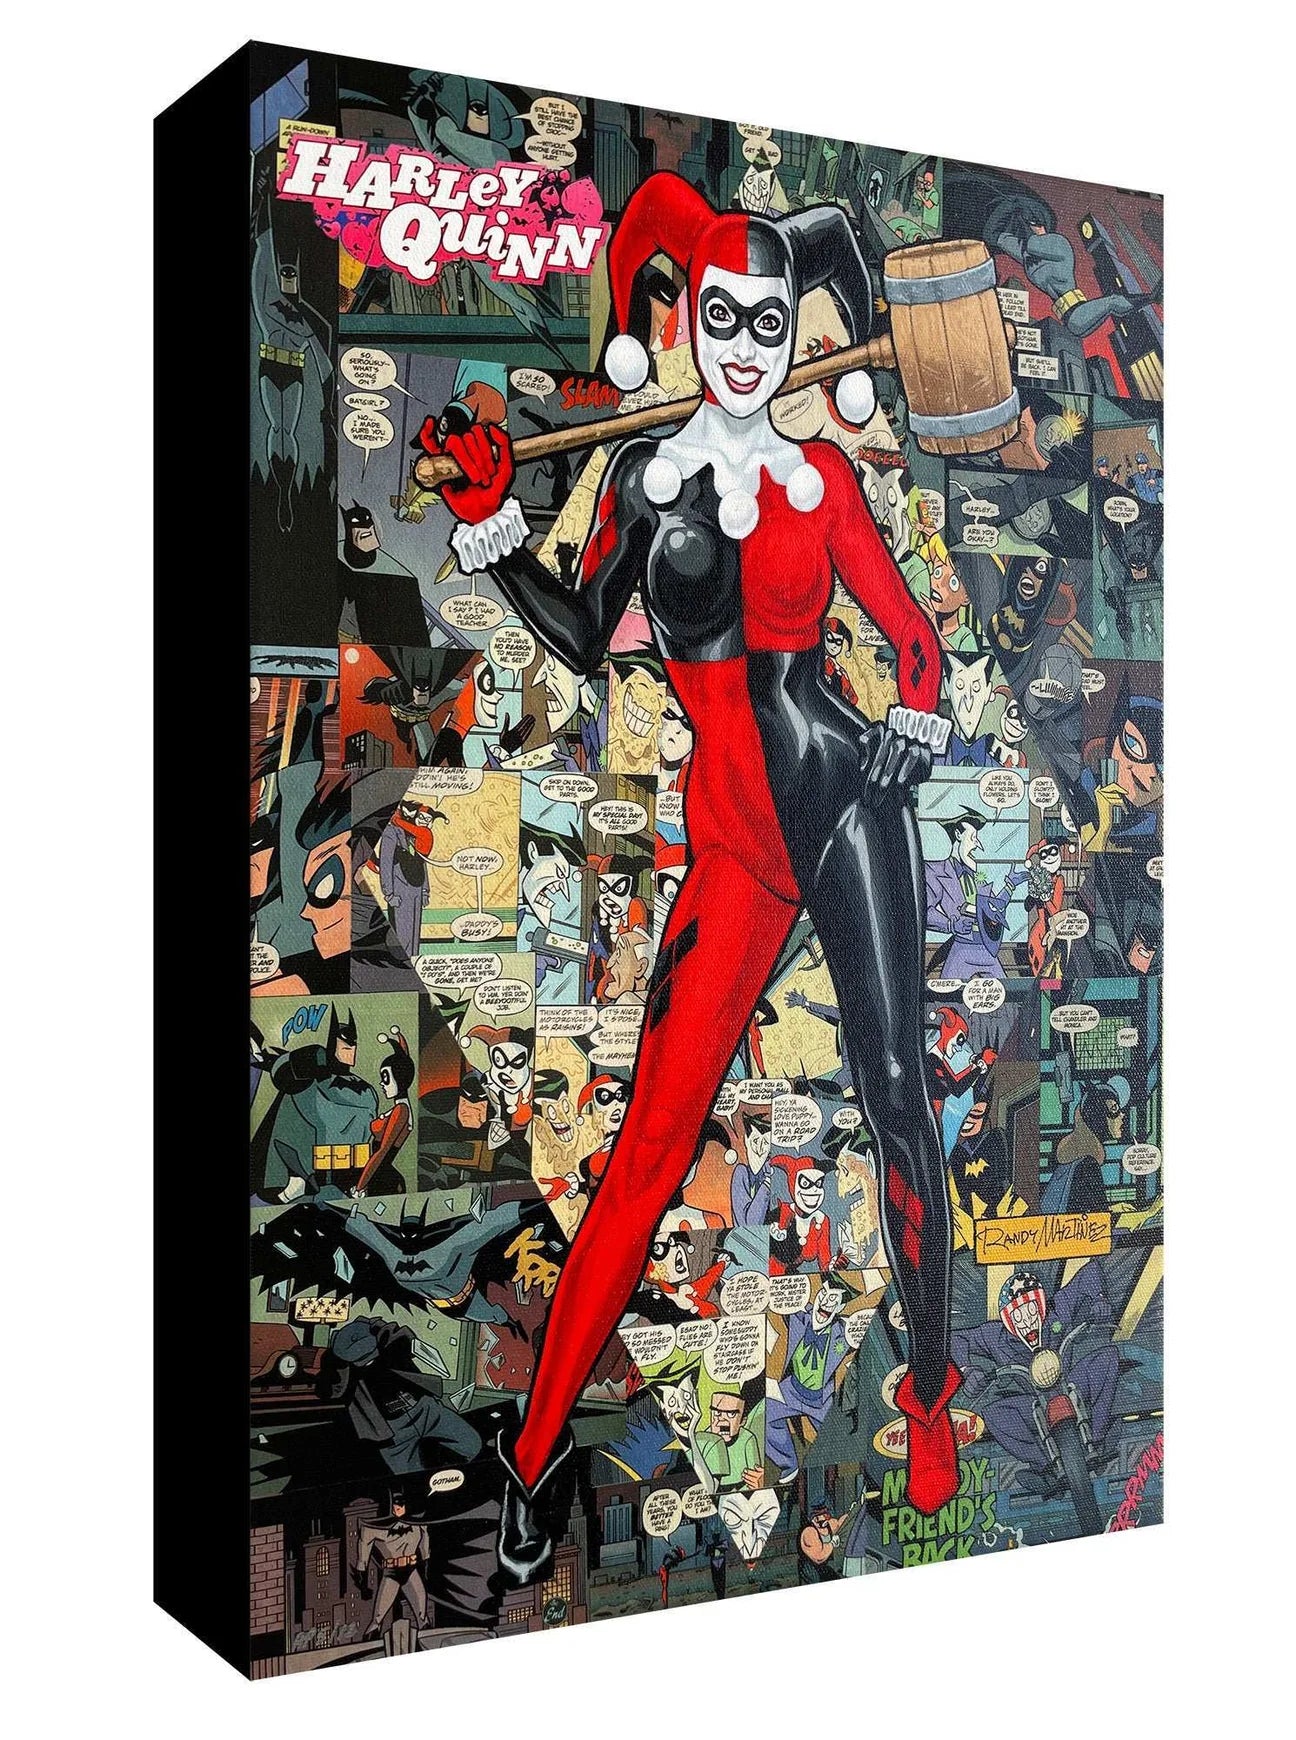 Harley Quinn popping out of a comic book page.